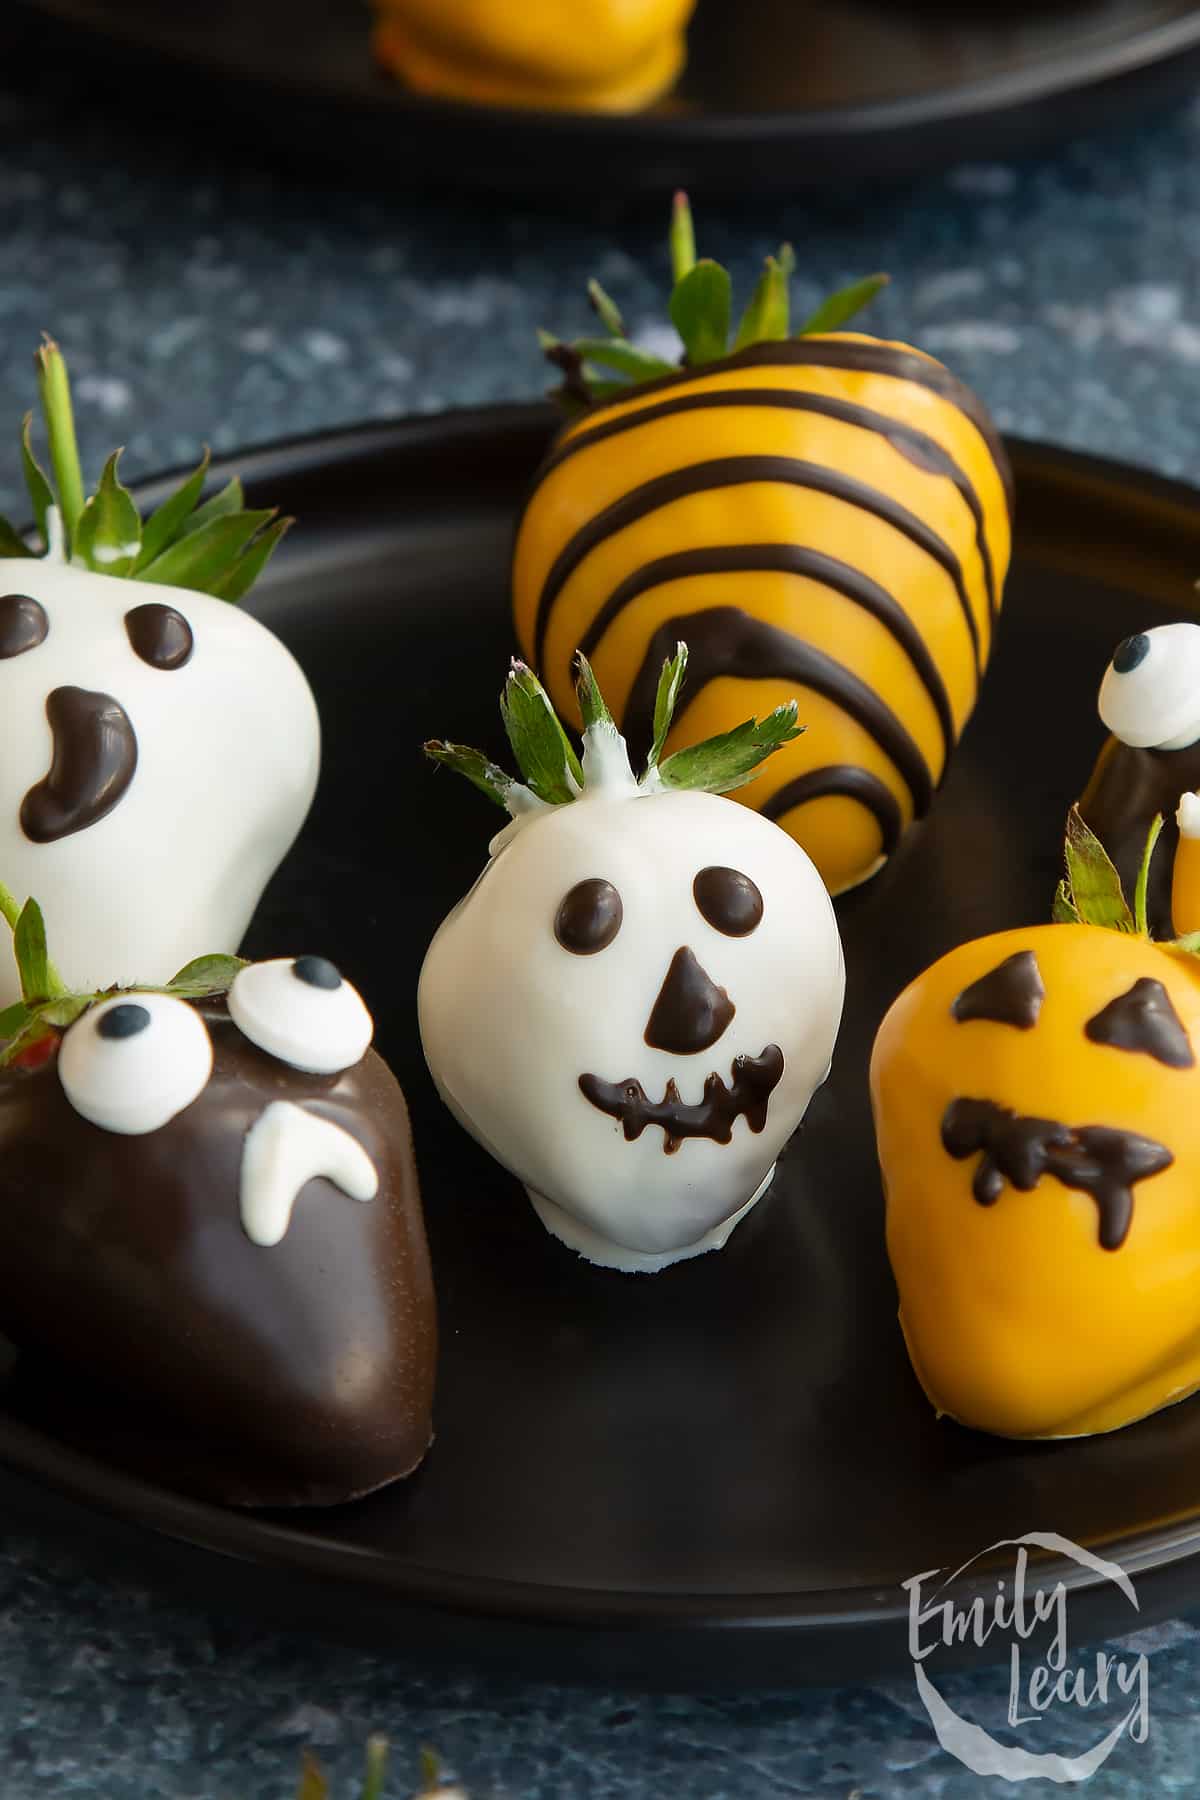 Finished plate of halloween chocolate covered strawberries.